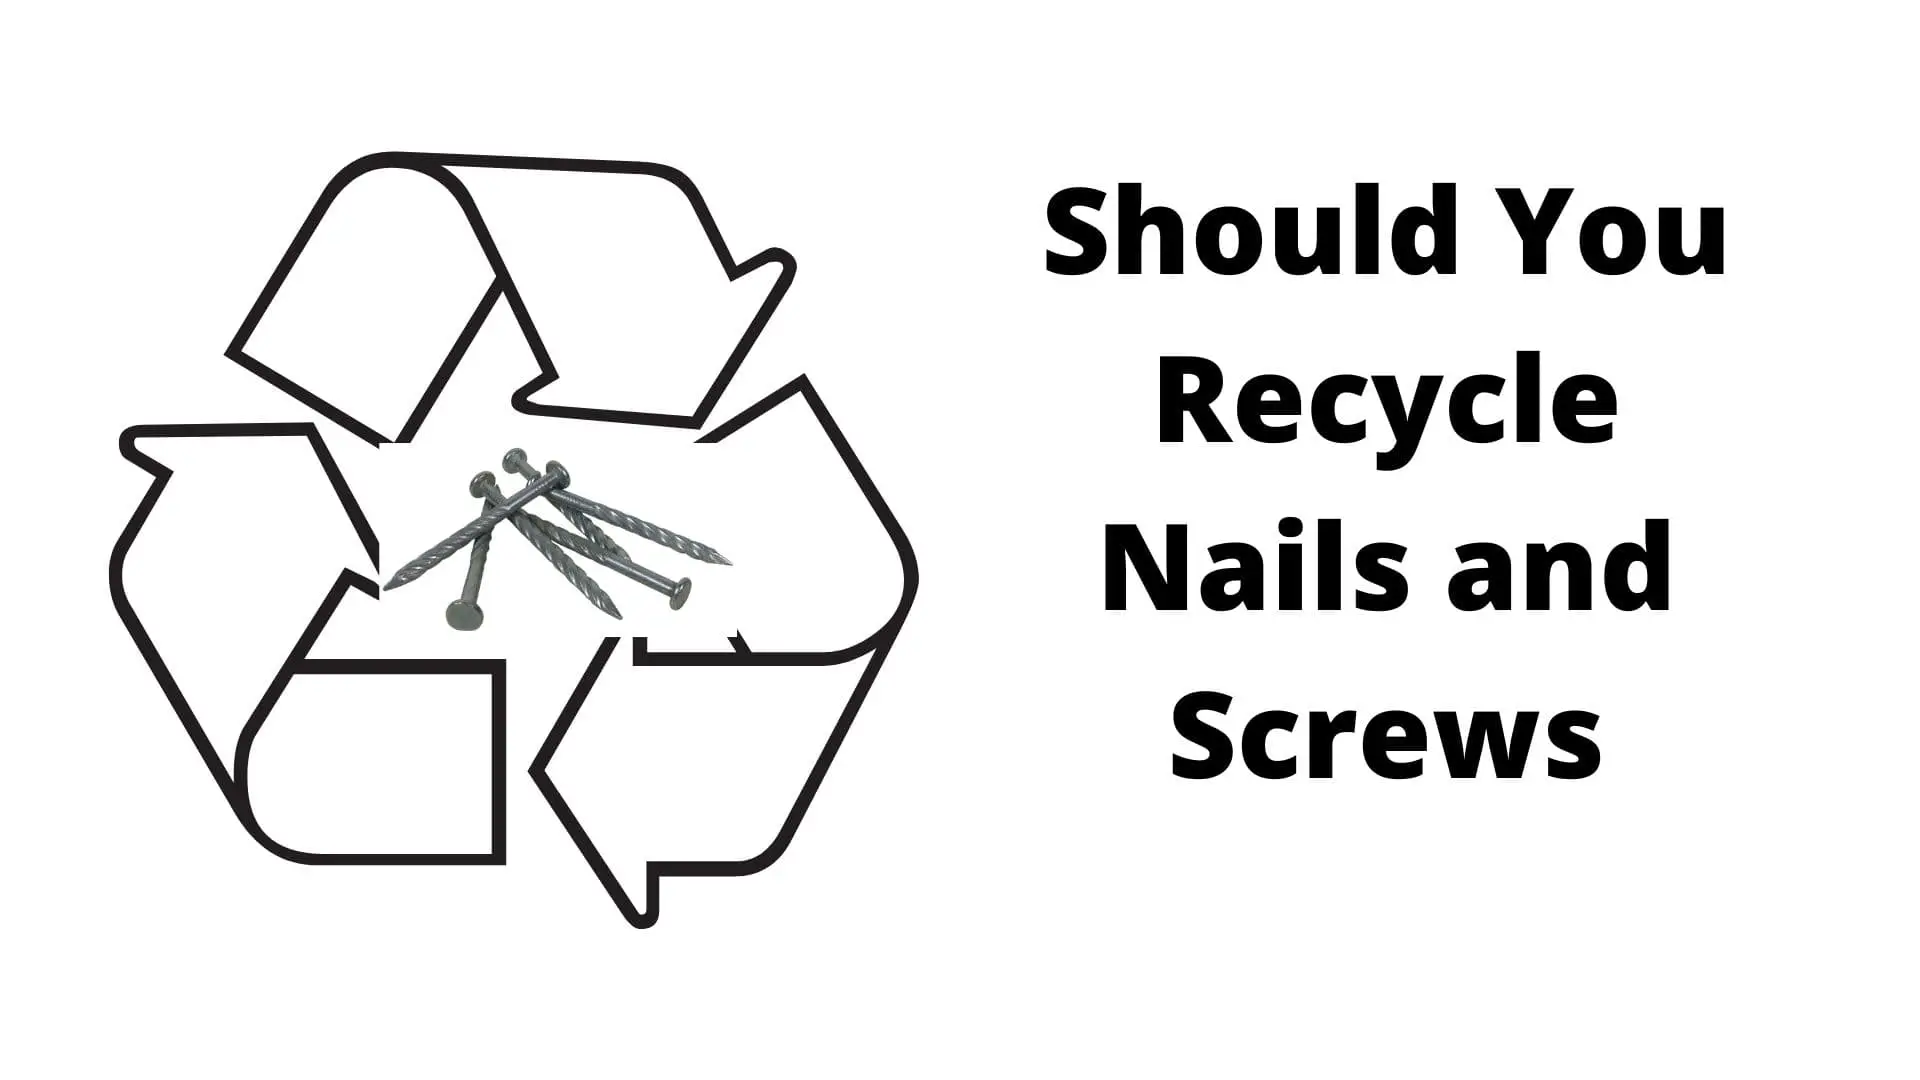 recycling used nails and screws